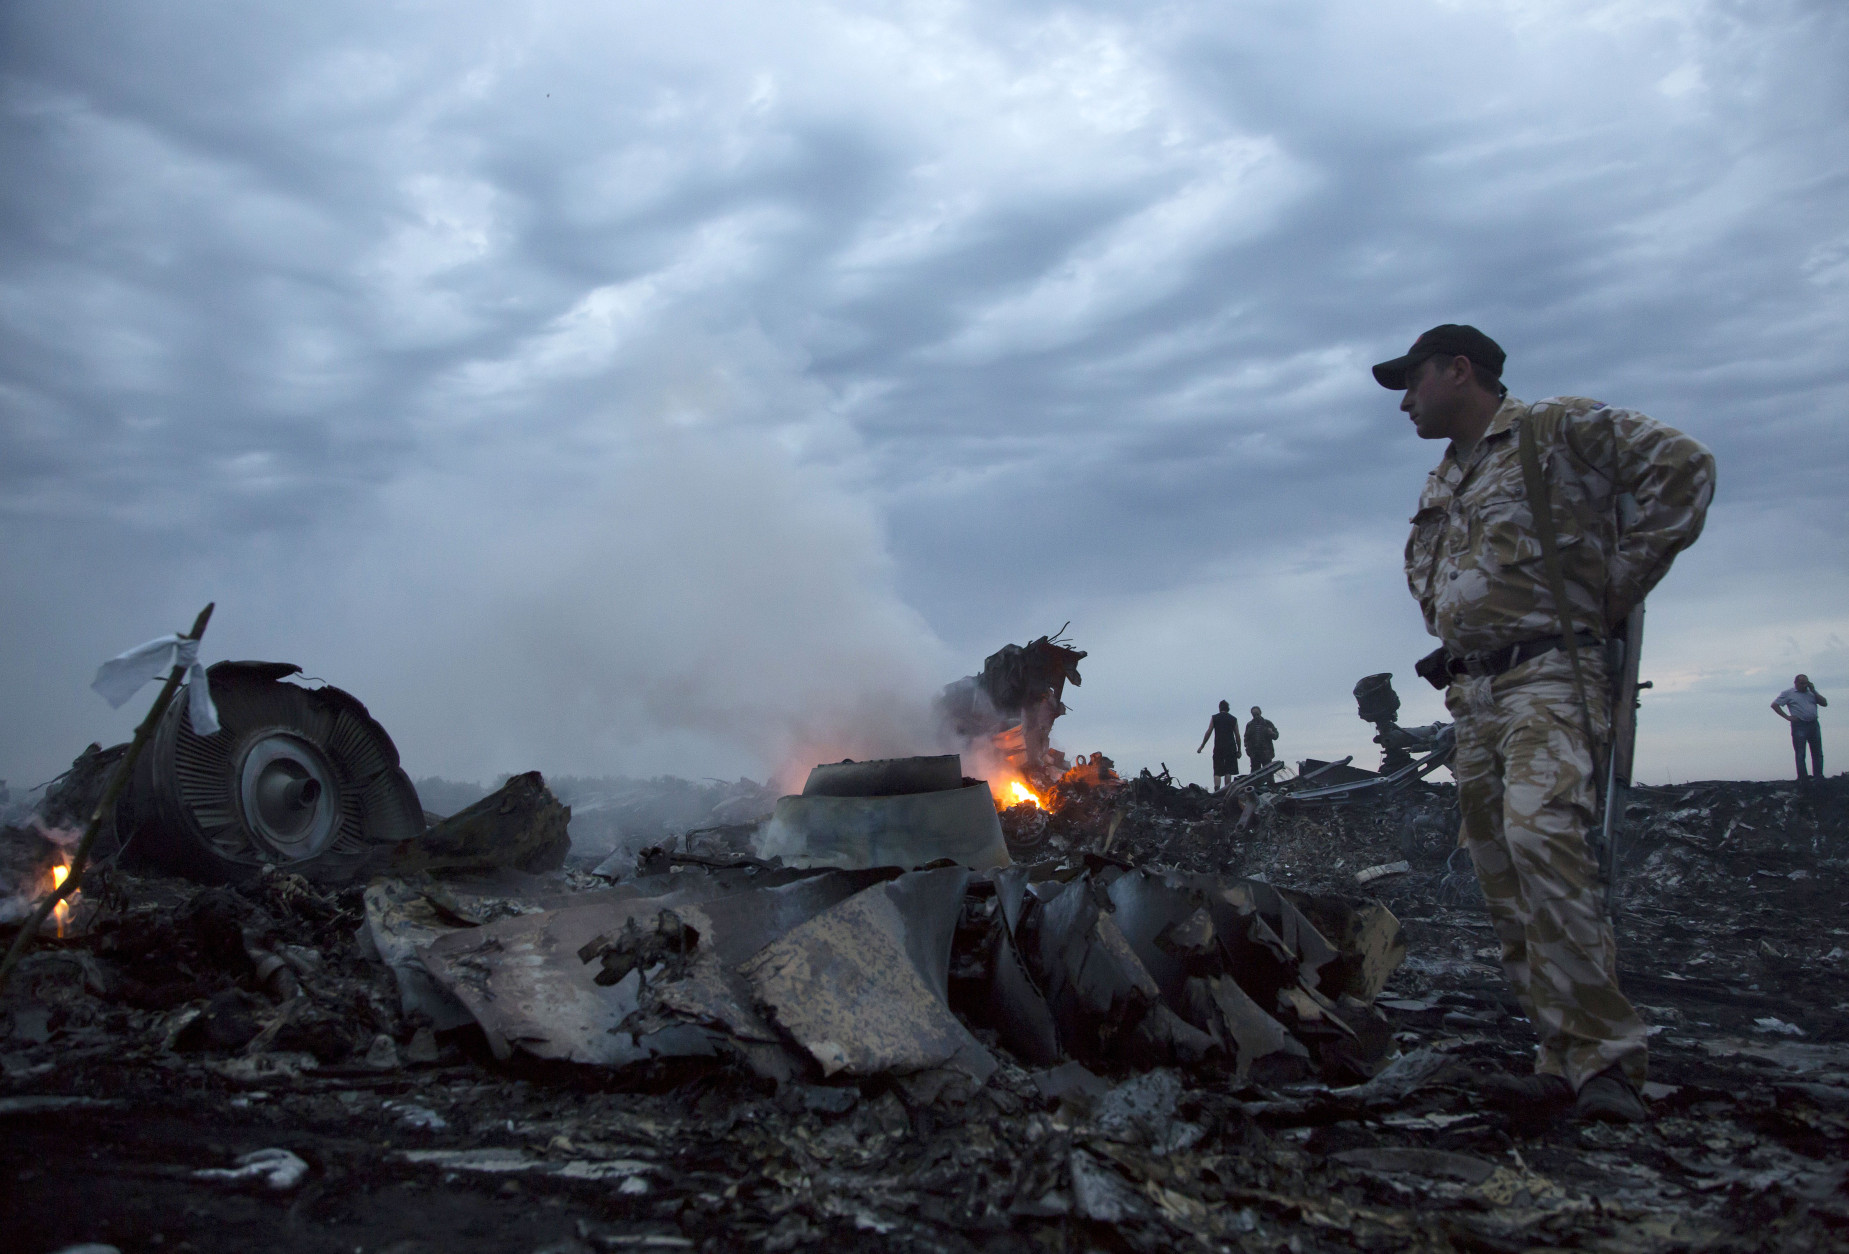 FOR USE AS DESIRED, YEAR END PHOTOS - FILE - People walk amongst the debris, at the crash site of a passenger plane near the village of Grabovo, Ukraine, Thursday, July 17, 2014.  A Ukrainian official said a passenger plane carrying 295 people was shot down as it flew over the country and plumes of black smoke rose up near a rebel-held village in eastern Ukraine. Malaysia Airlines tweeted that it lost contact with one of its flights as it was traveling from Amsterdam to Kuala Lumpur over Ukrainian airspace.  (AP Photo/Dmitry Lovetsky, File)